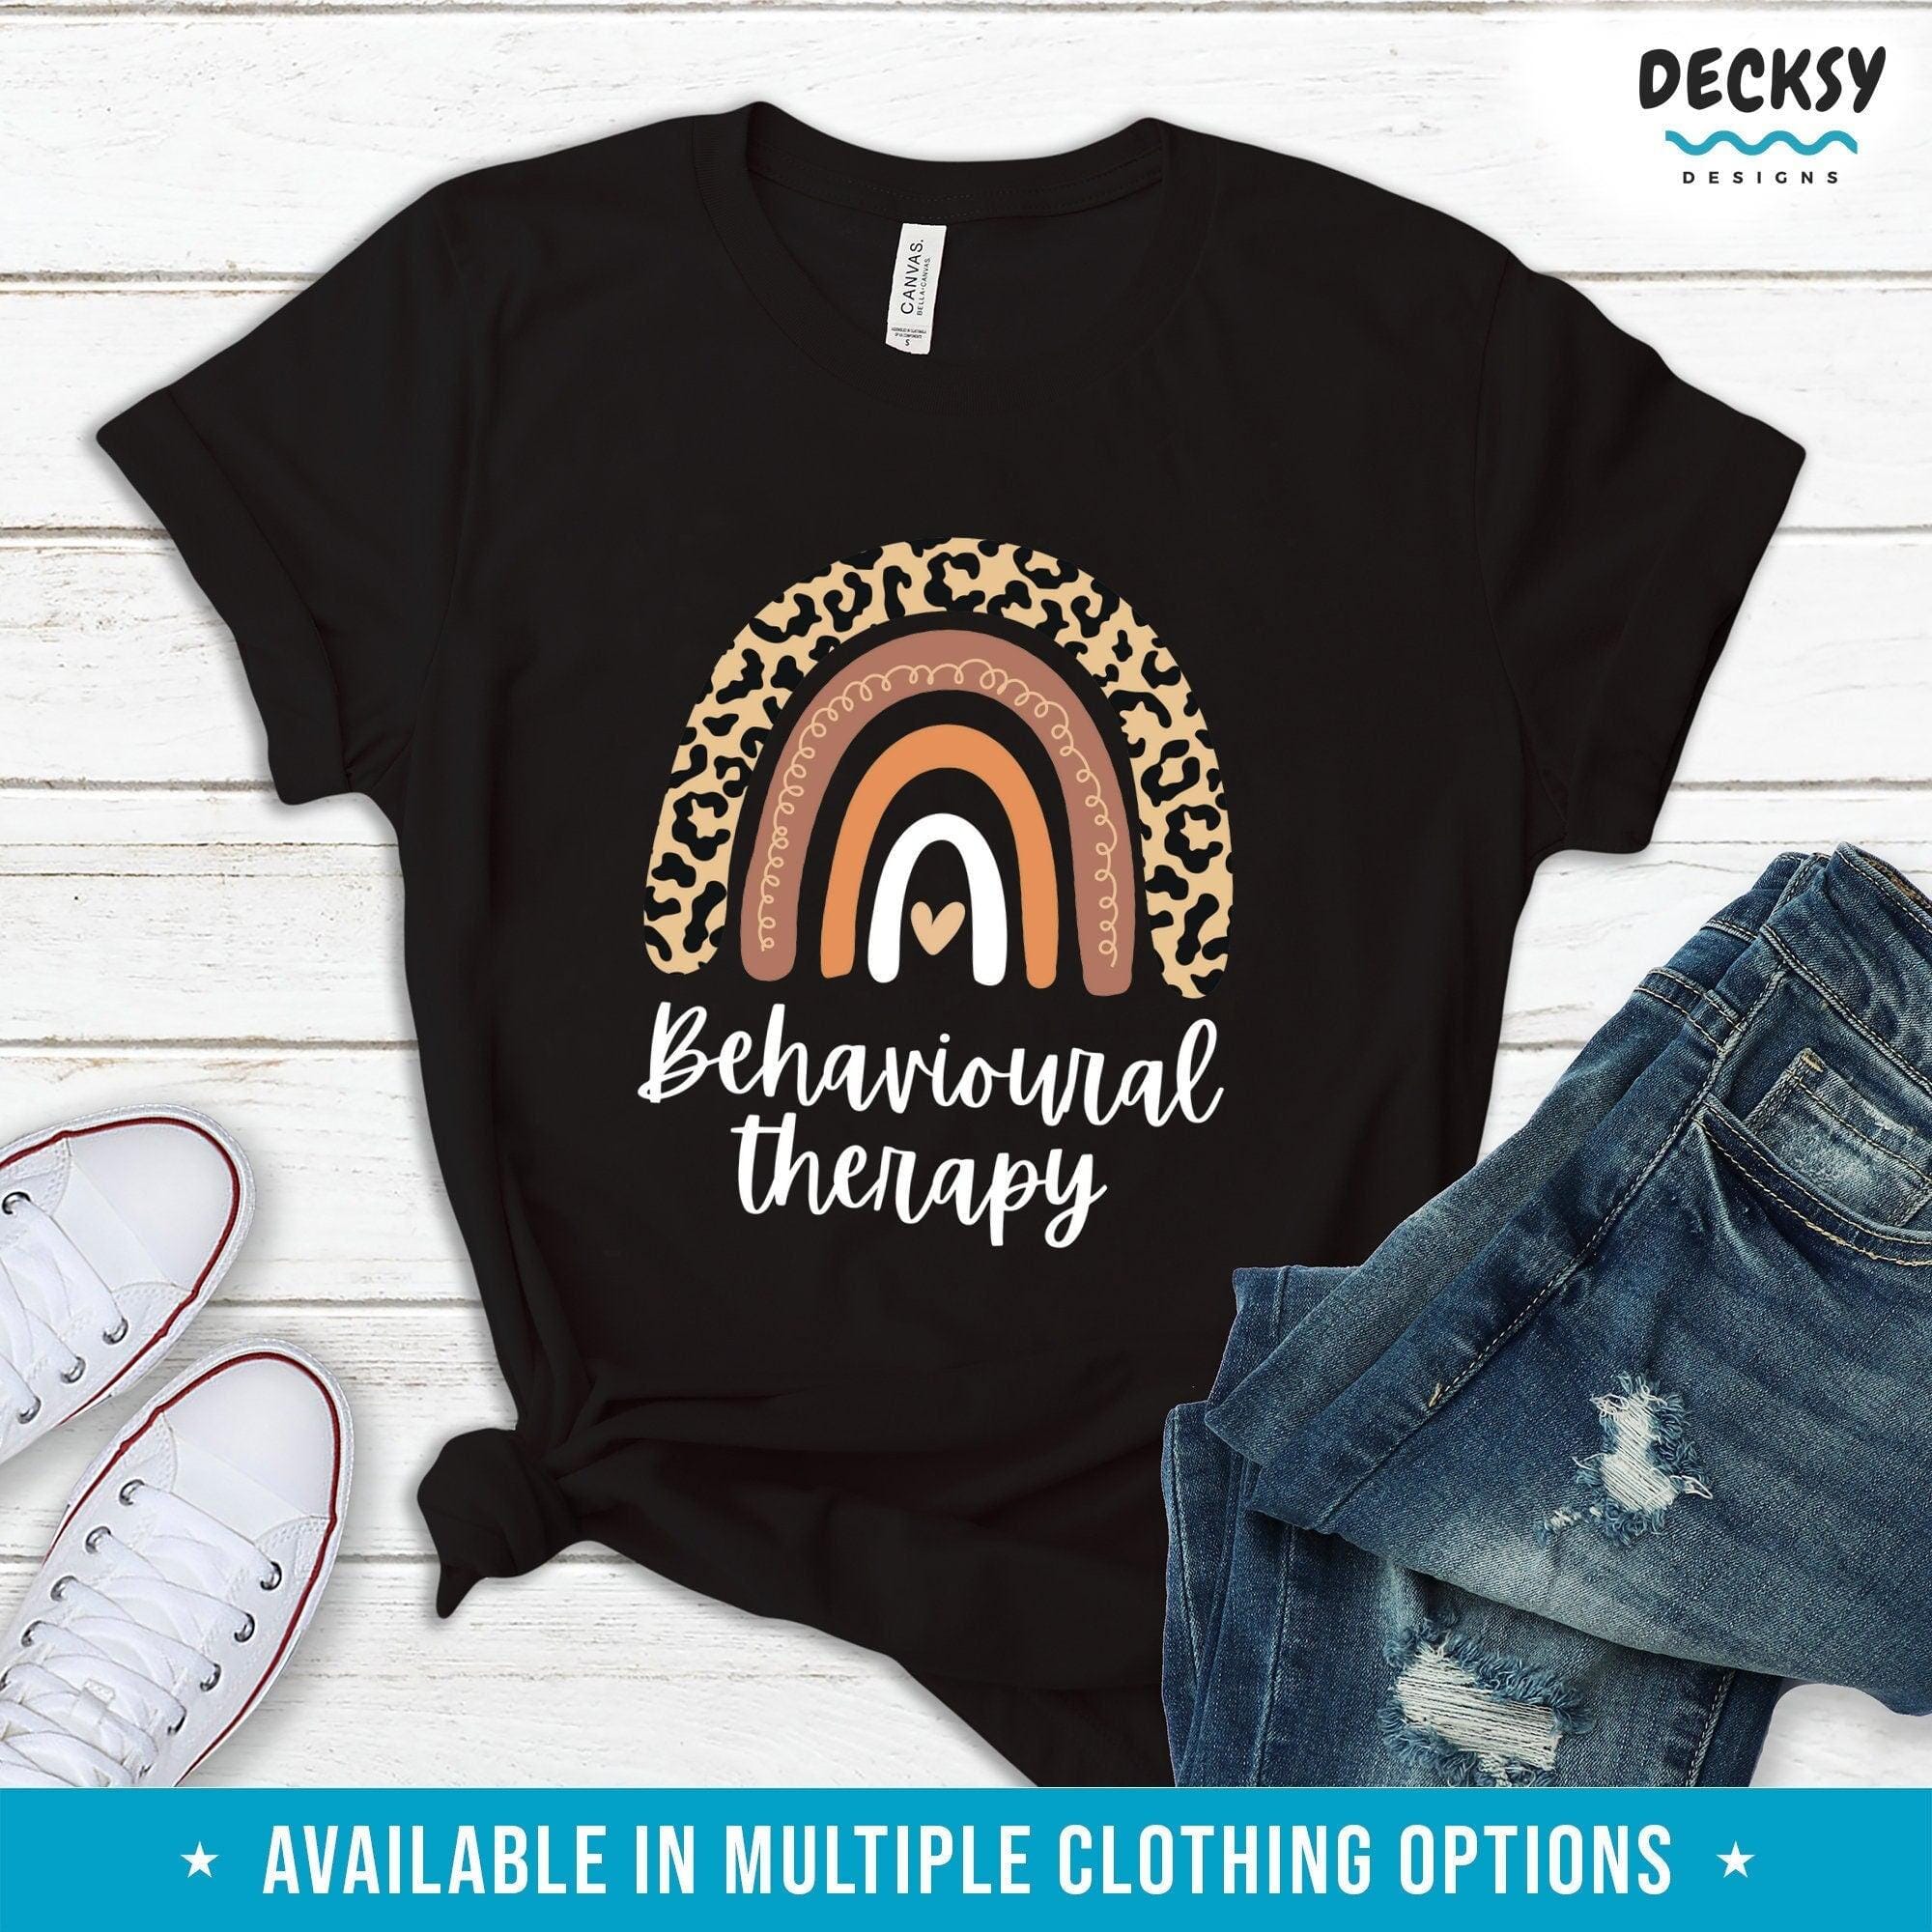 Behavioural Therapy Shirt, Therapist Gift-Clothing:Gender-Neutral Adult Clothing:Tops & Tees:T-shirts:Graphic Tees-DecksyDesigns